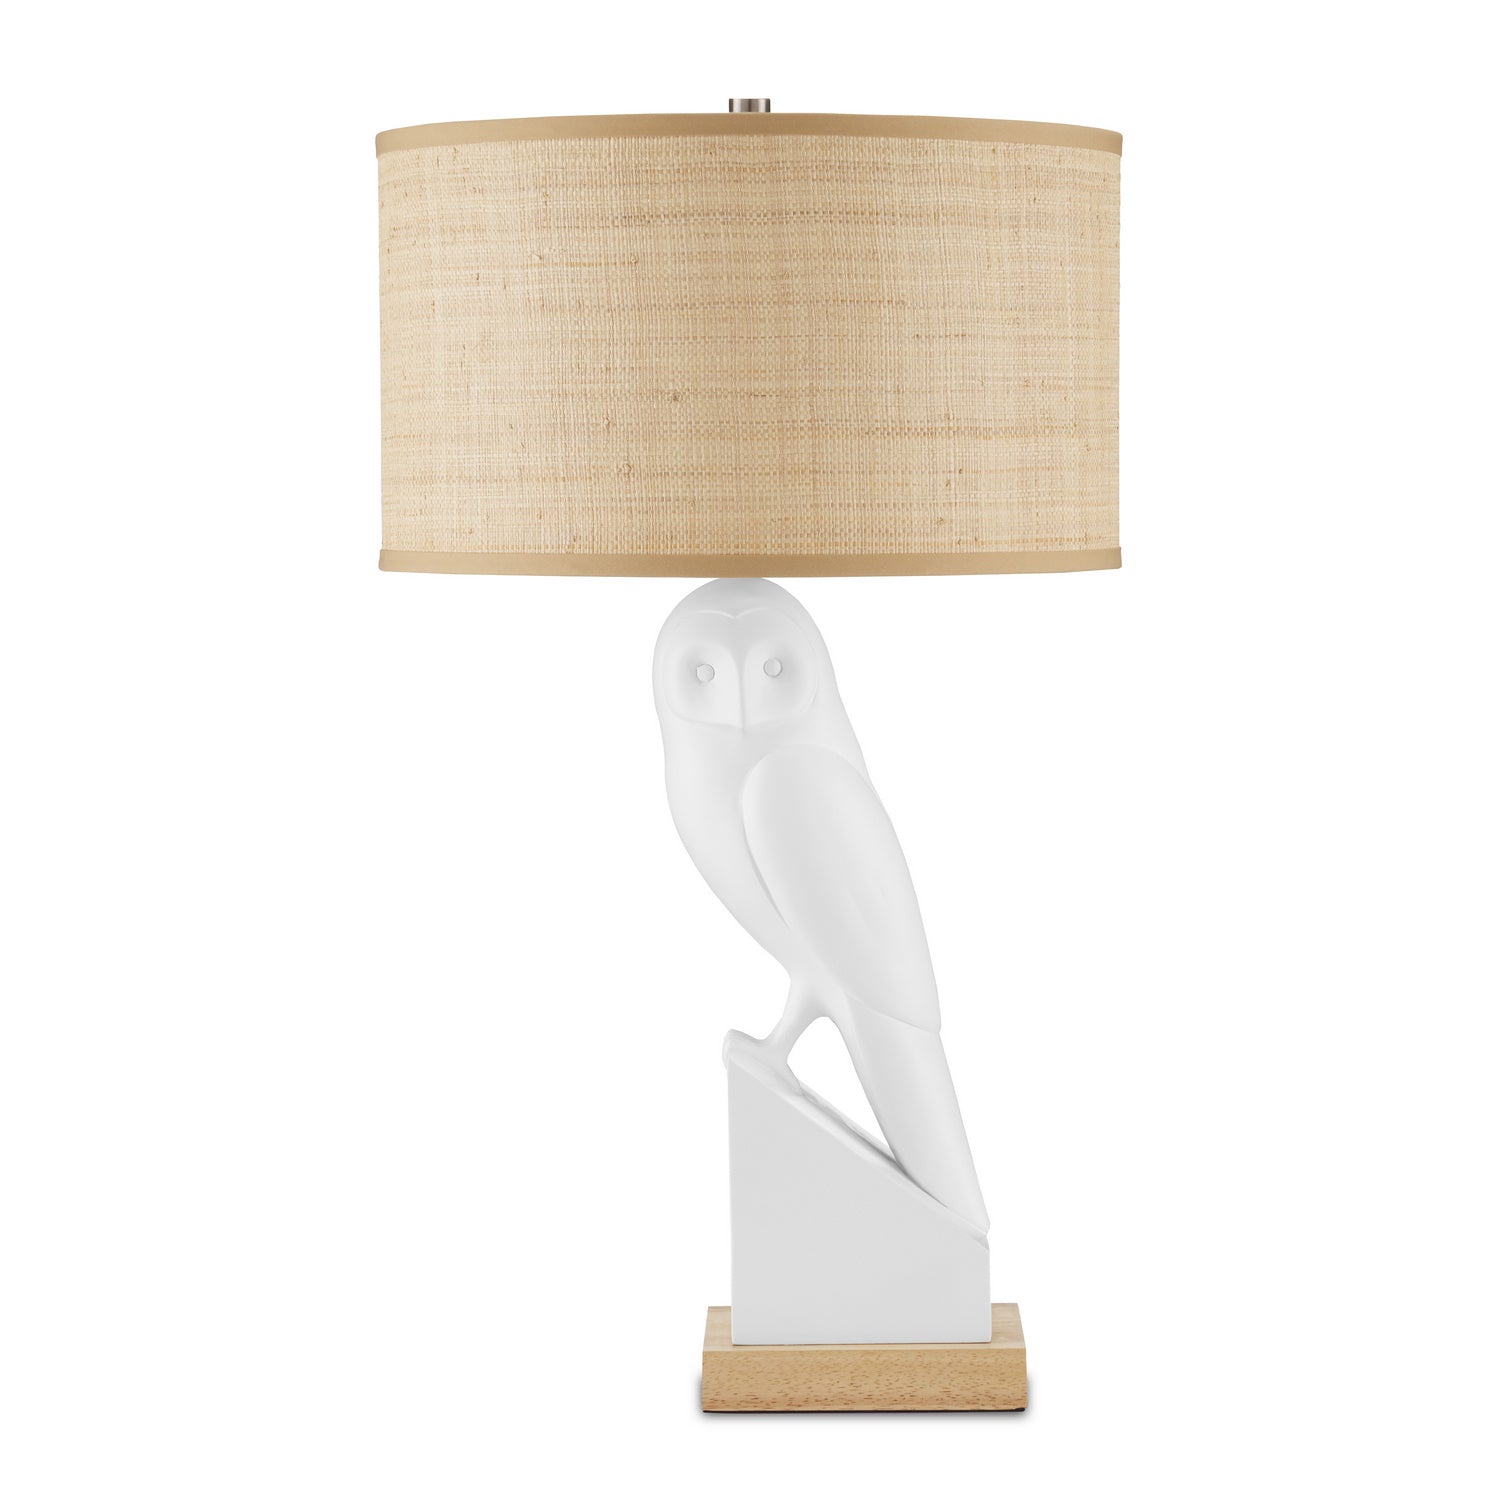 Currey and Company - 6000-0816 - One Light Table Lamp - Snowy - White/Natural Wood/Polished Nickel